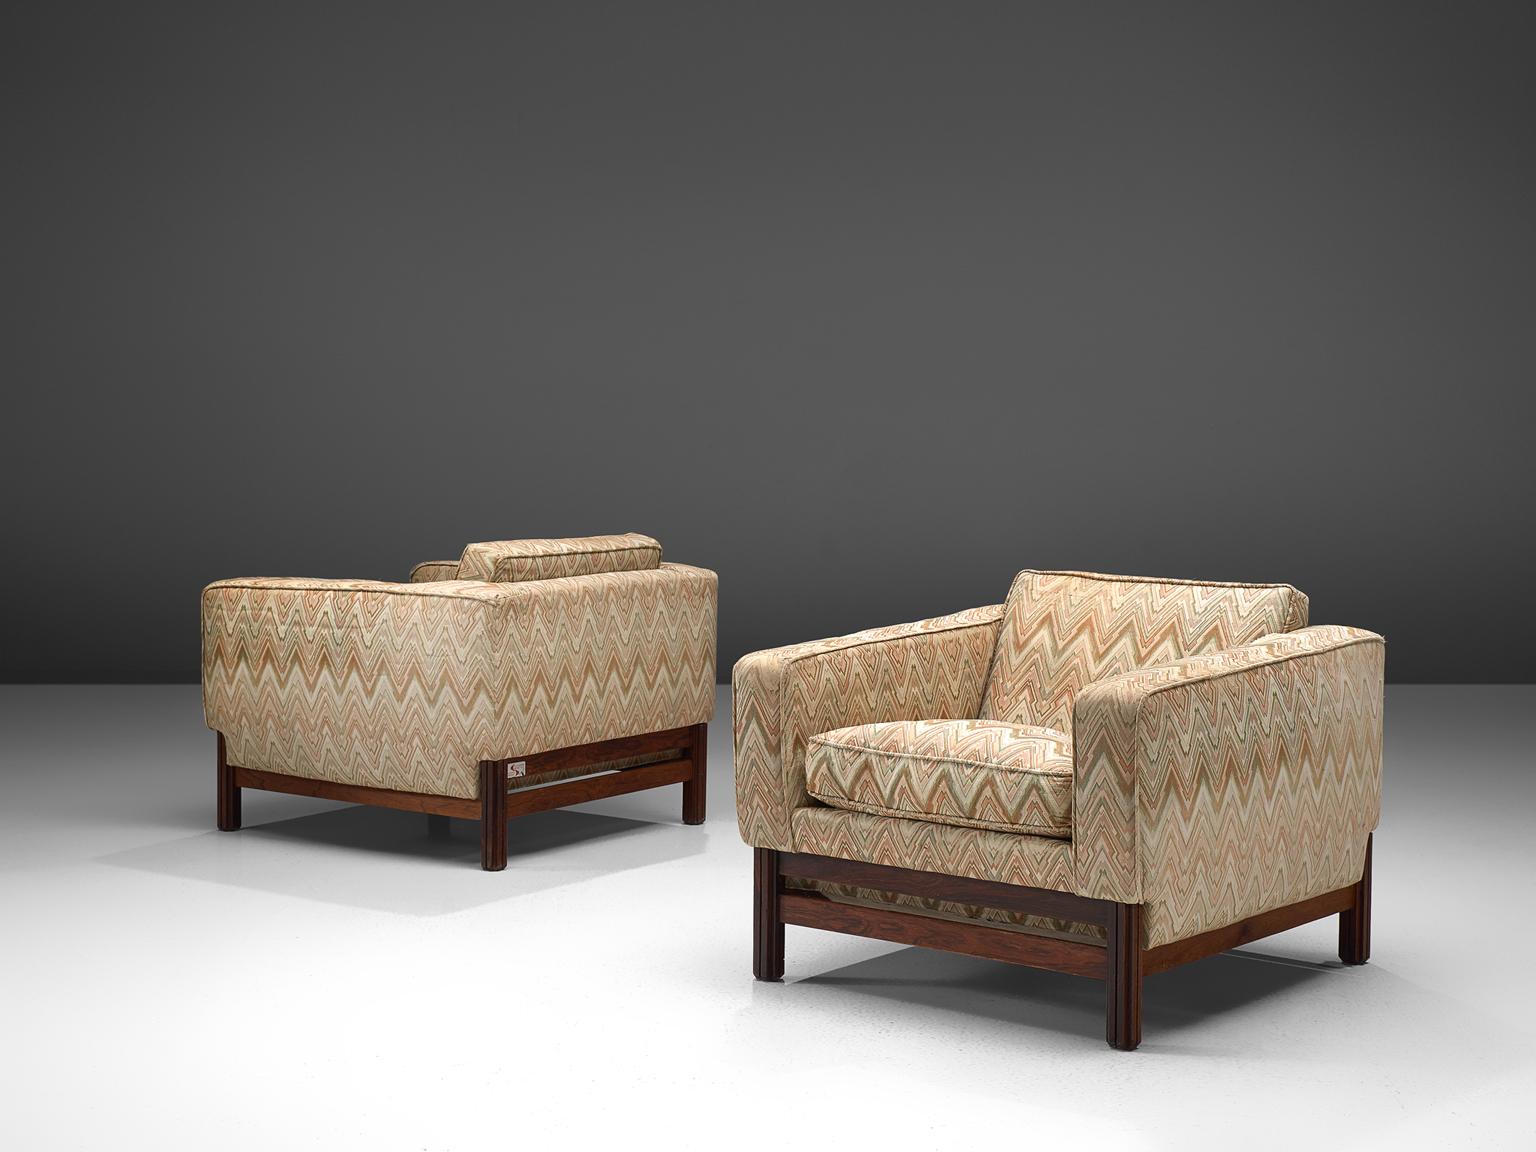 Saporiti, set of two lounge chairs in rosewood and fabric, Italy, 1960s.

These chairs are equipped with a rosewood frame and a retro sand to beige colored upholstery. These chairs are designed in a modest, yet distinguished look. The chairs